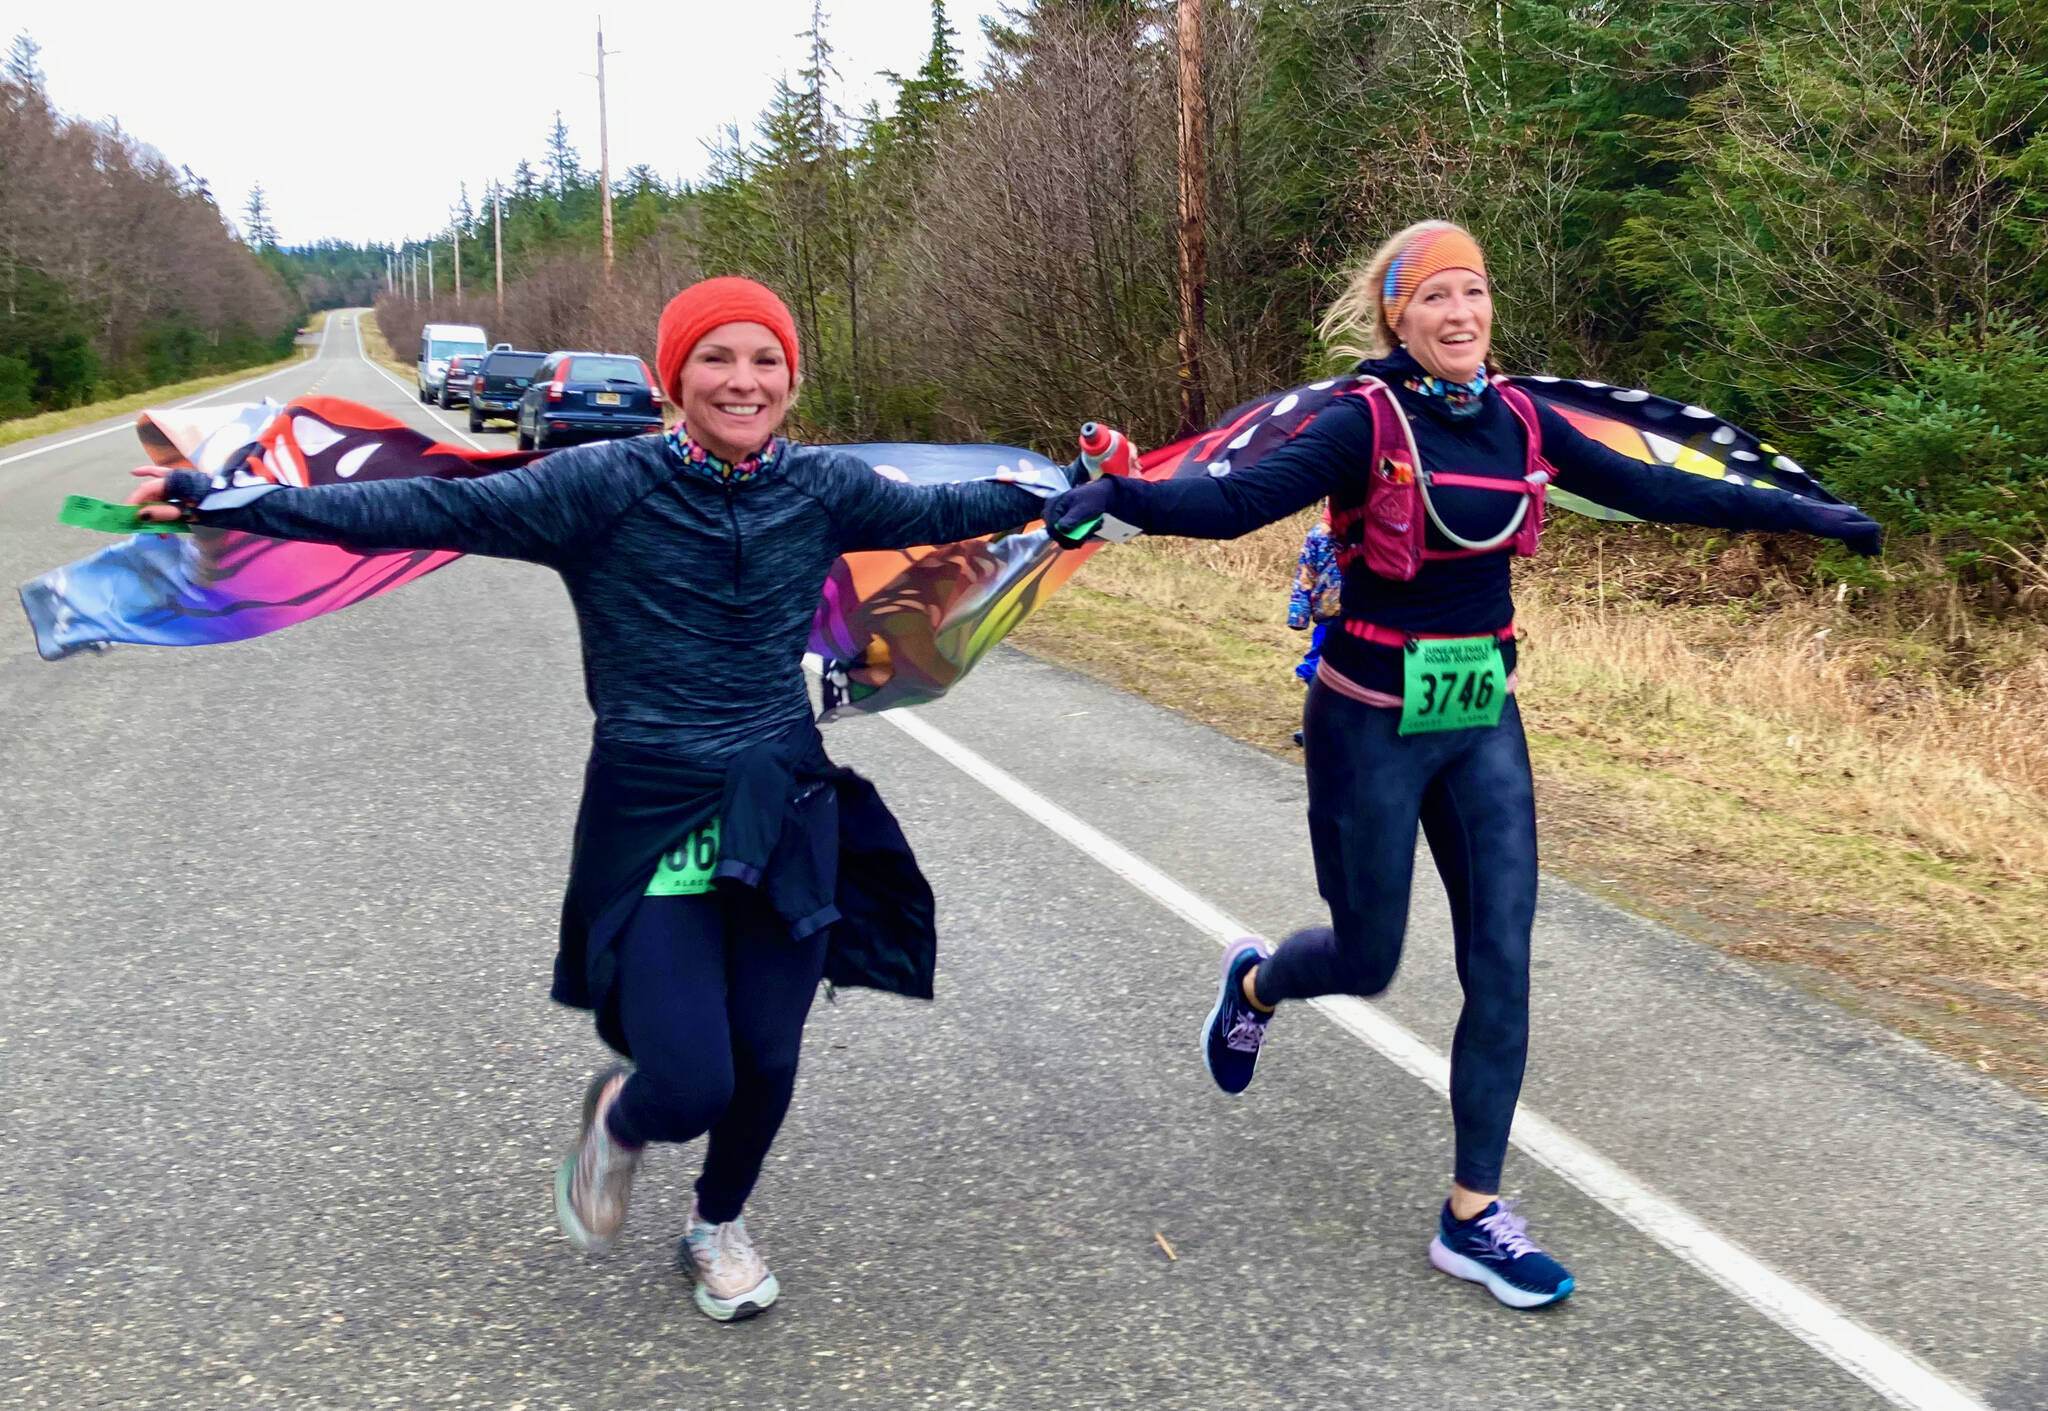 Suzanne Morris, left, and Melissa Anderson finish the Halloween Half Marathon on Saturday. (Klas Stolpe for the Juneau Empire)